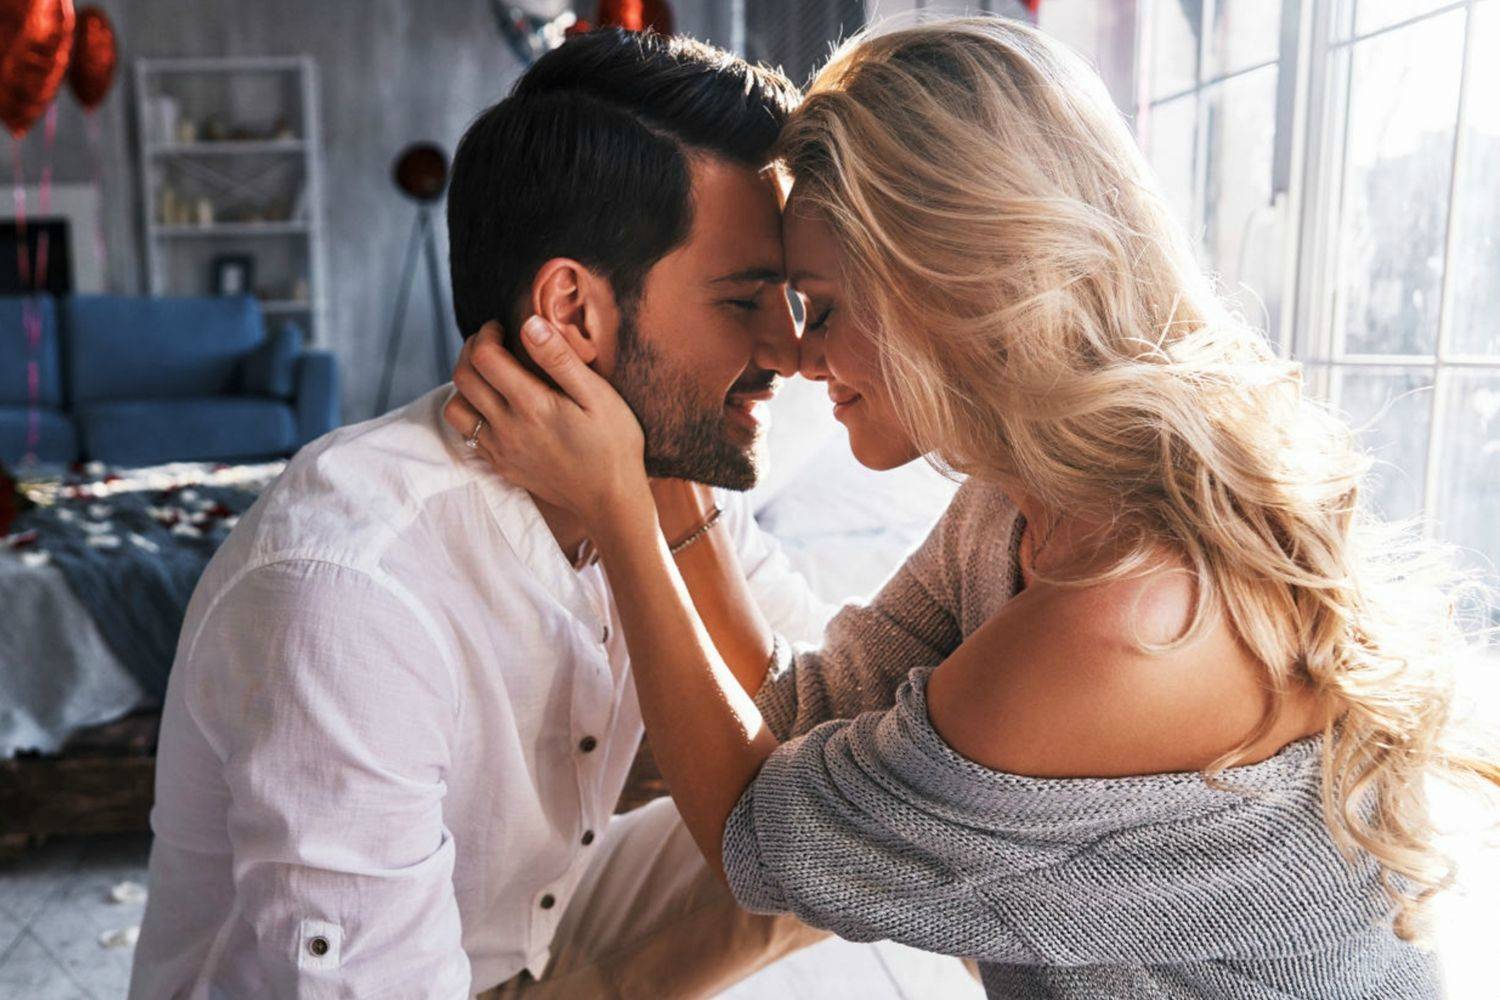 Can I Use CBD Oil for My Libido?